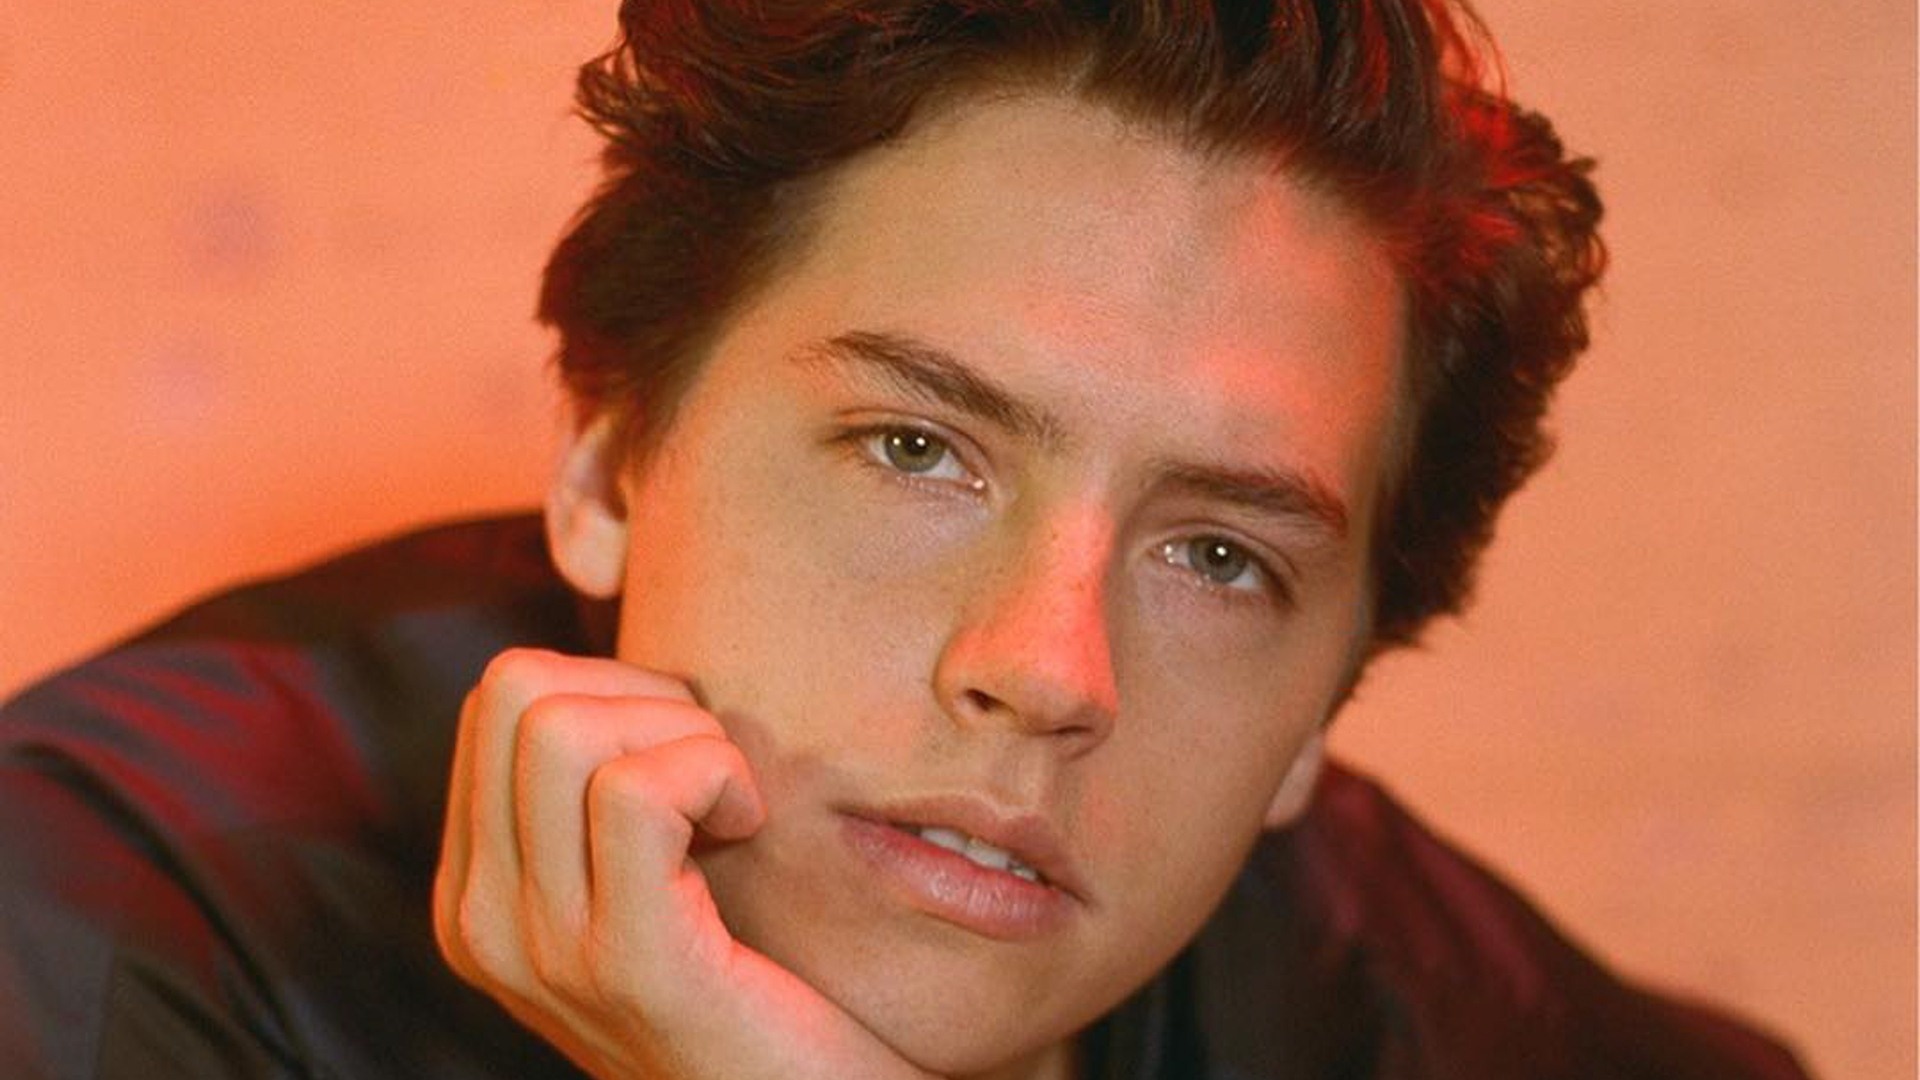 Cole Sprouse TV shows, Wallpaper 2019, Fresh look, Recent images, 1920x1080 Full HD Desktop